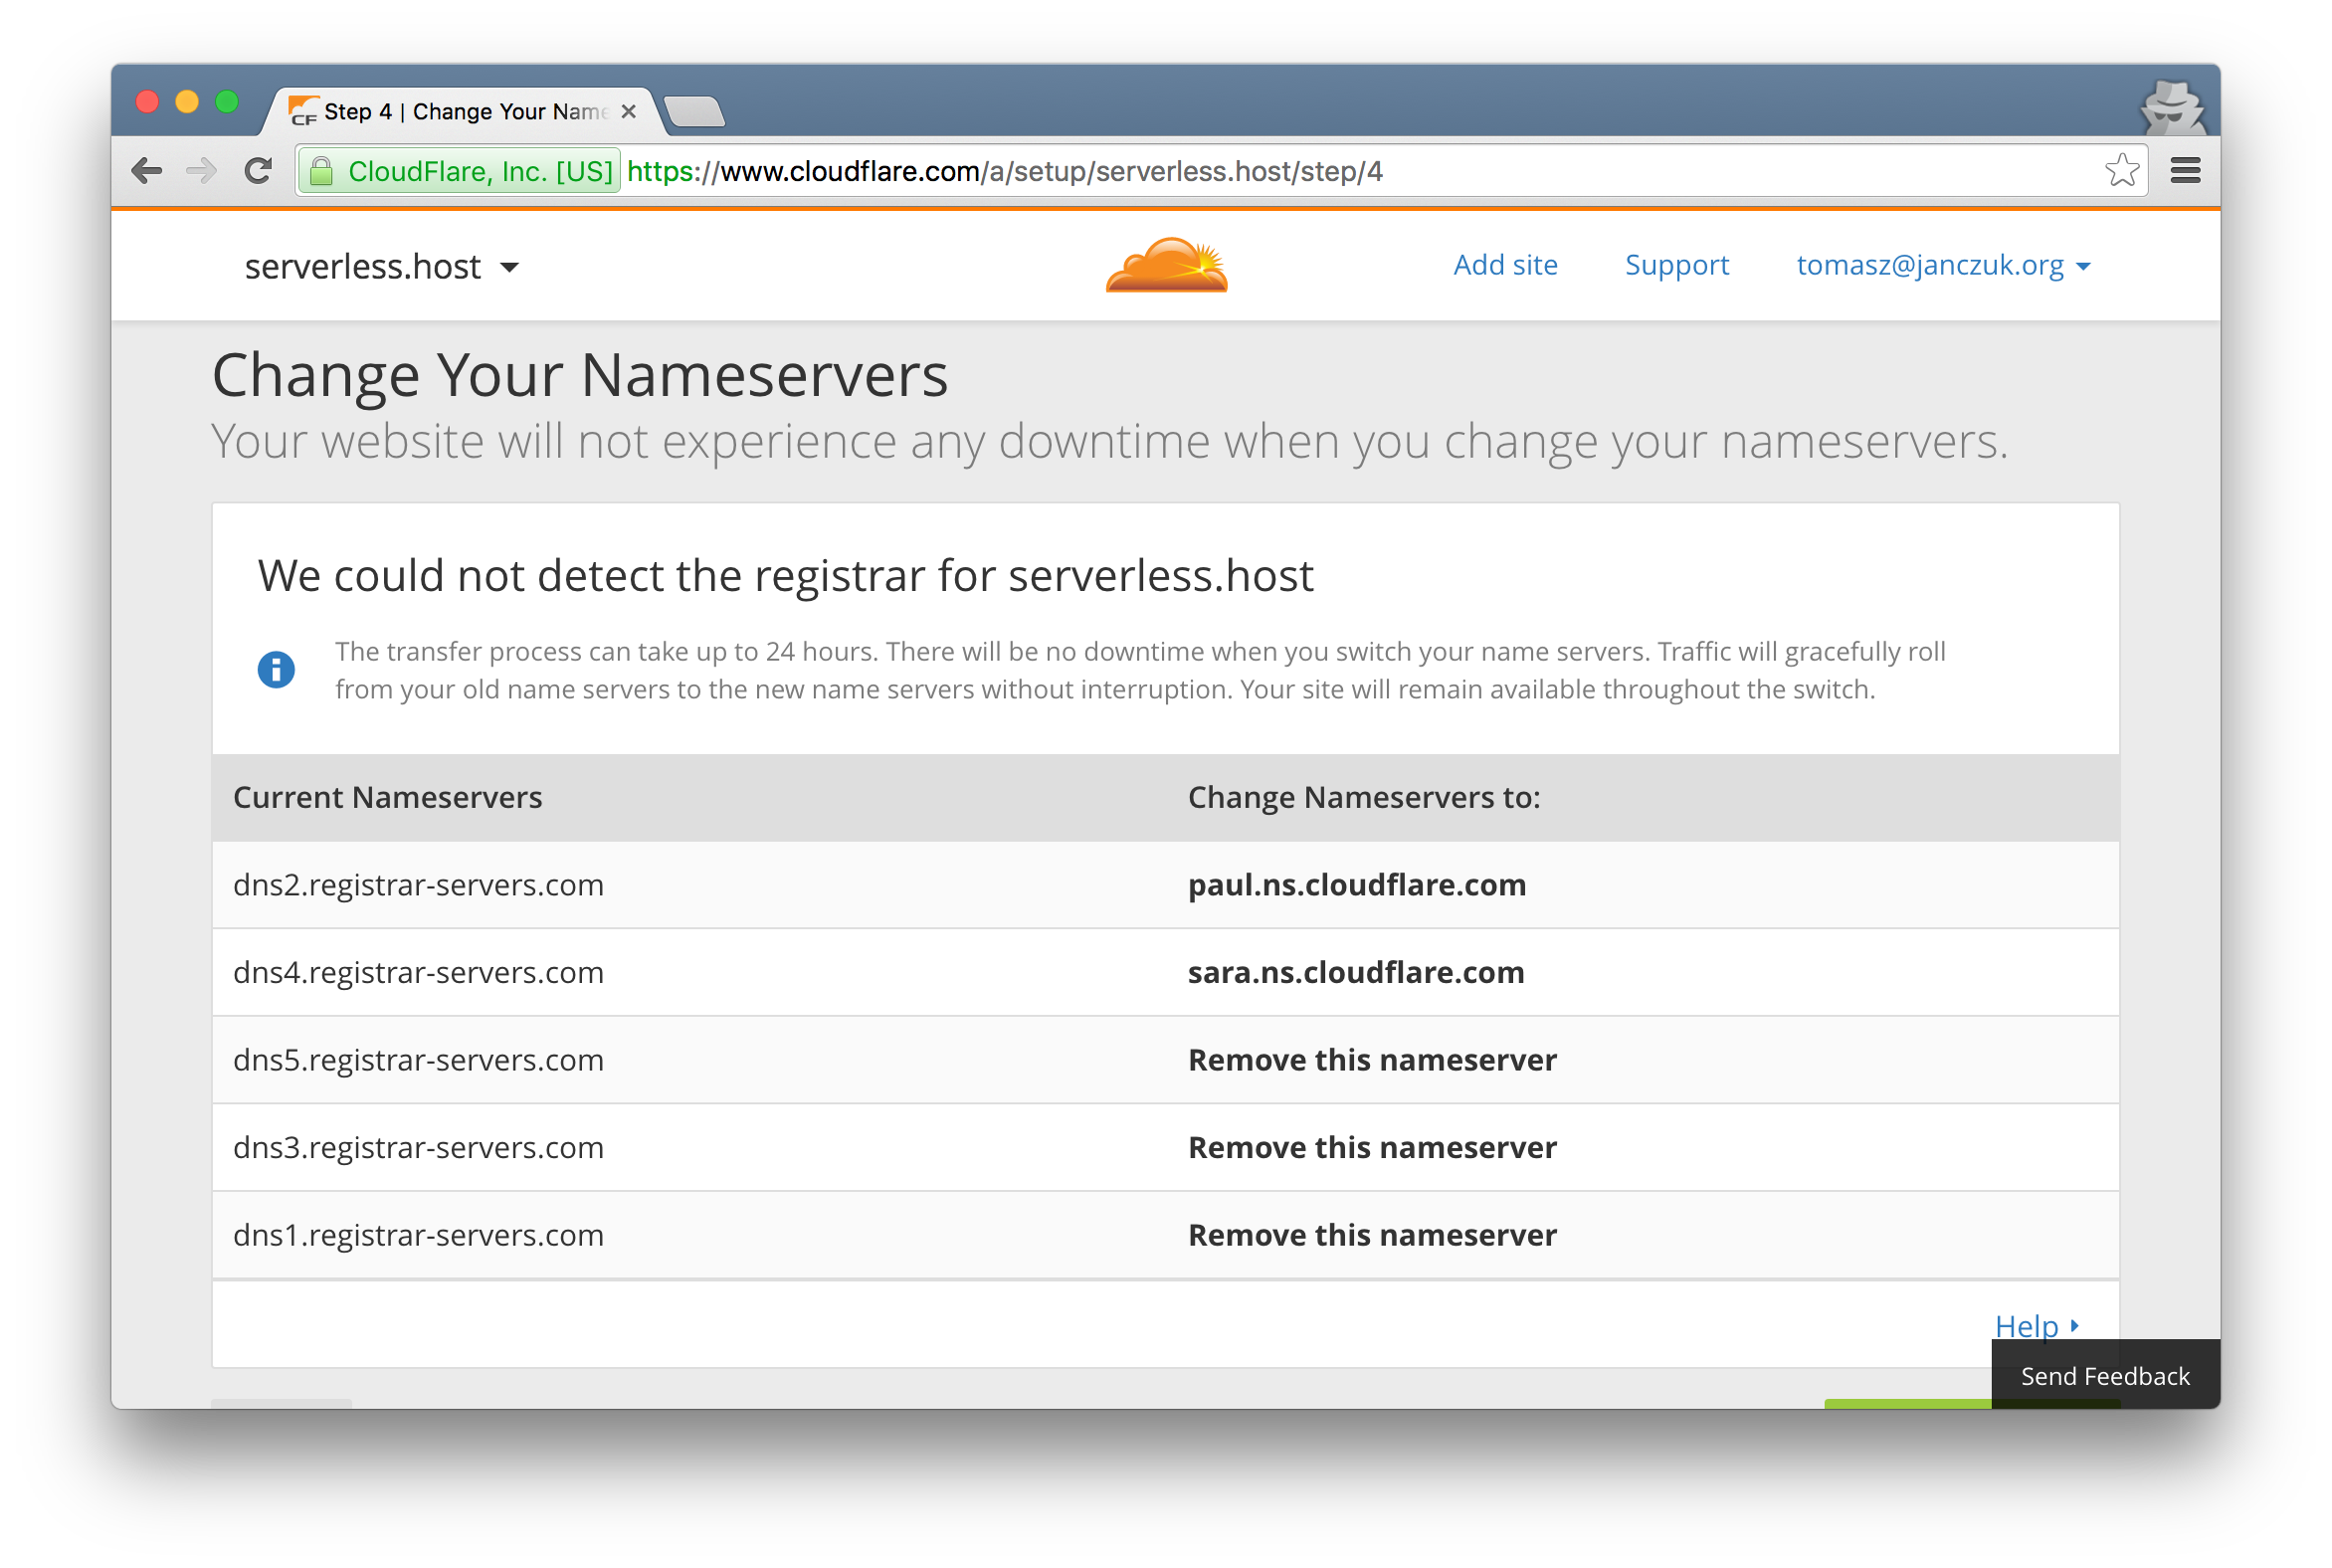 New CloudFlare name servers to configure with your domain name registrar